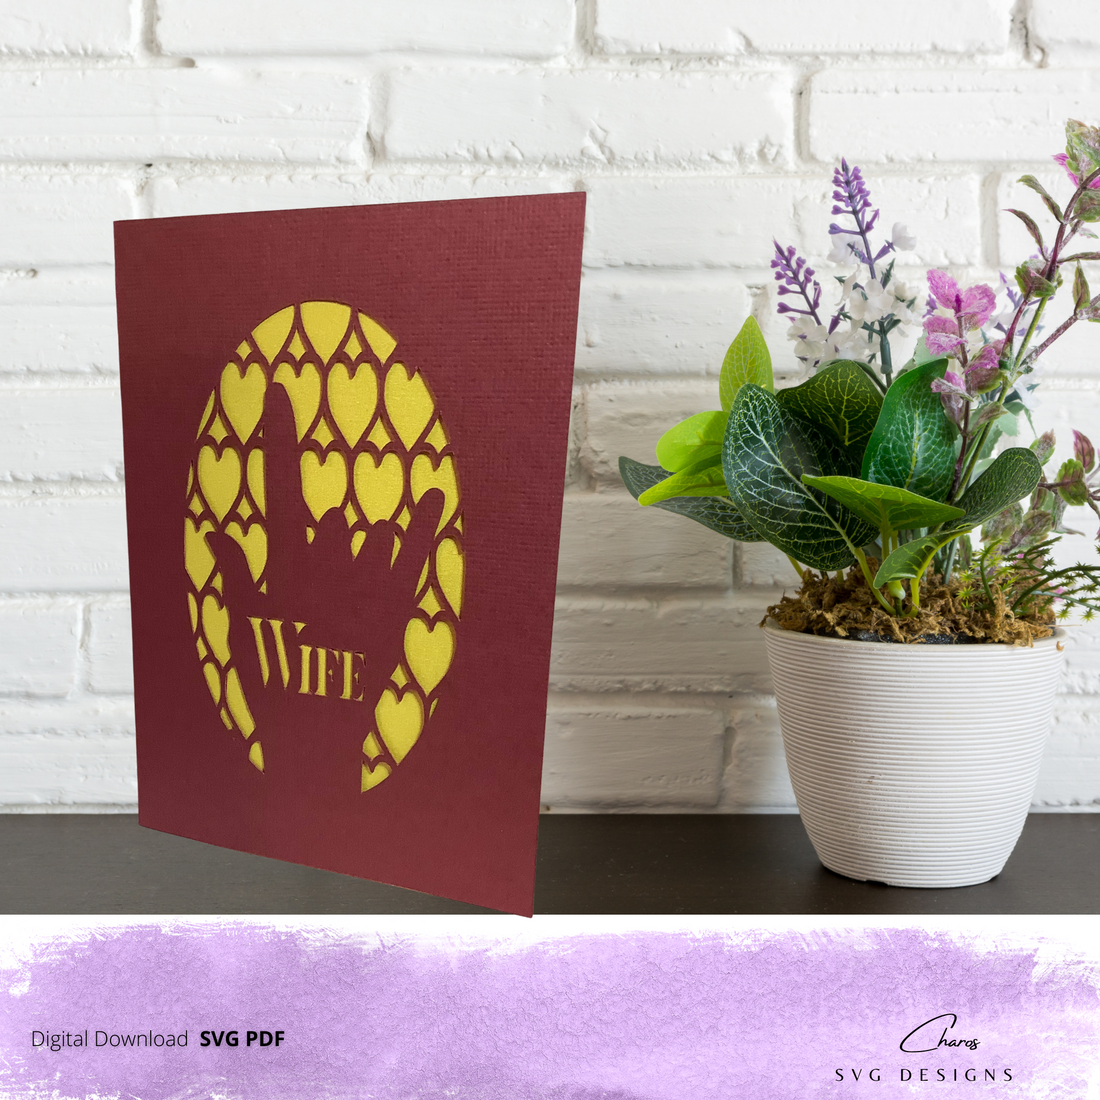 SVG: I Love You Heart Wife and Husband (in Sign Language) Greeting Card w/ Free Envelope SVG | All Occasions Card SVG | Signs | Greeting